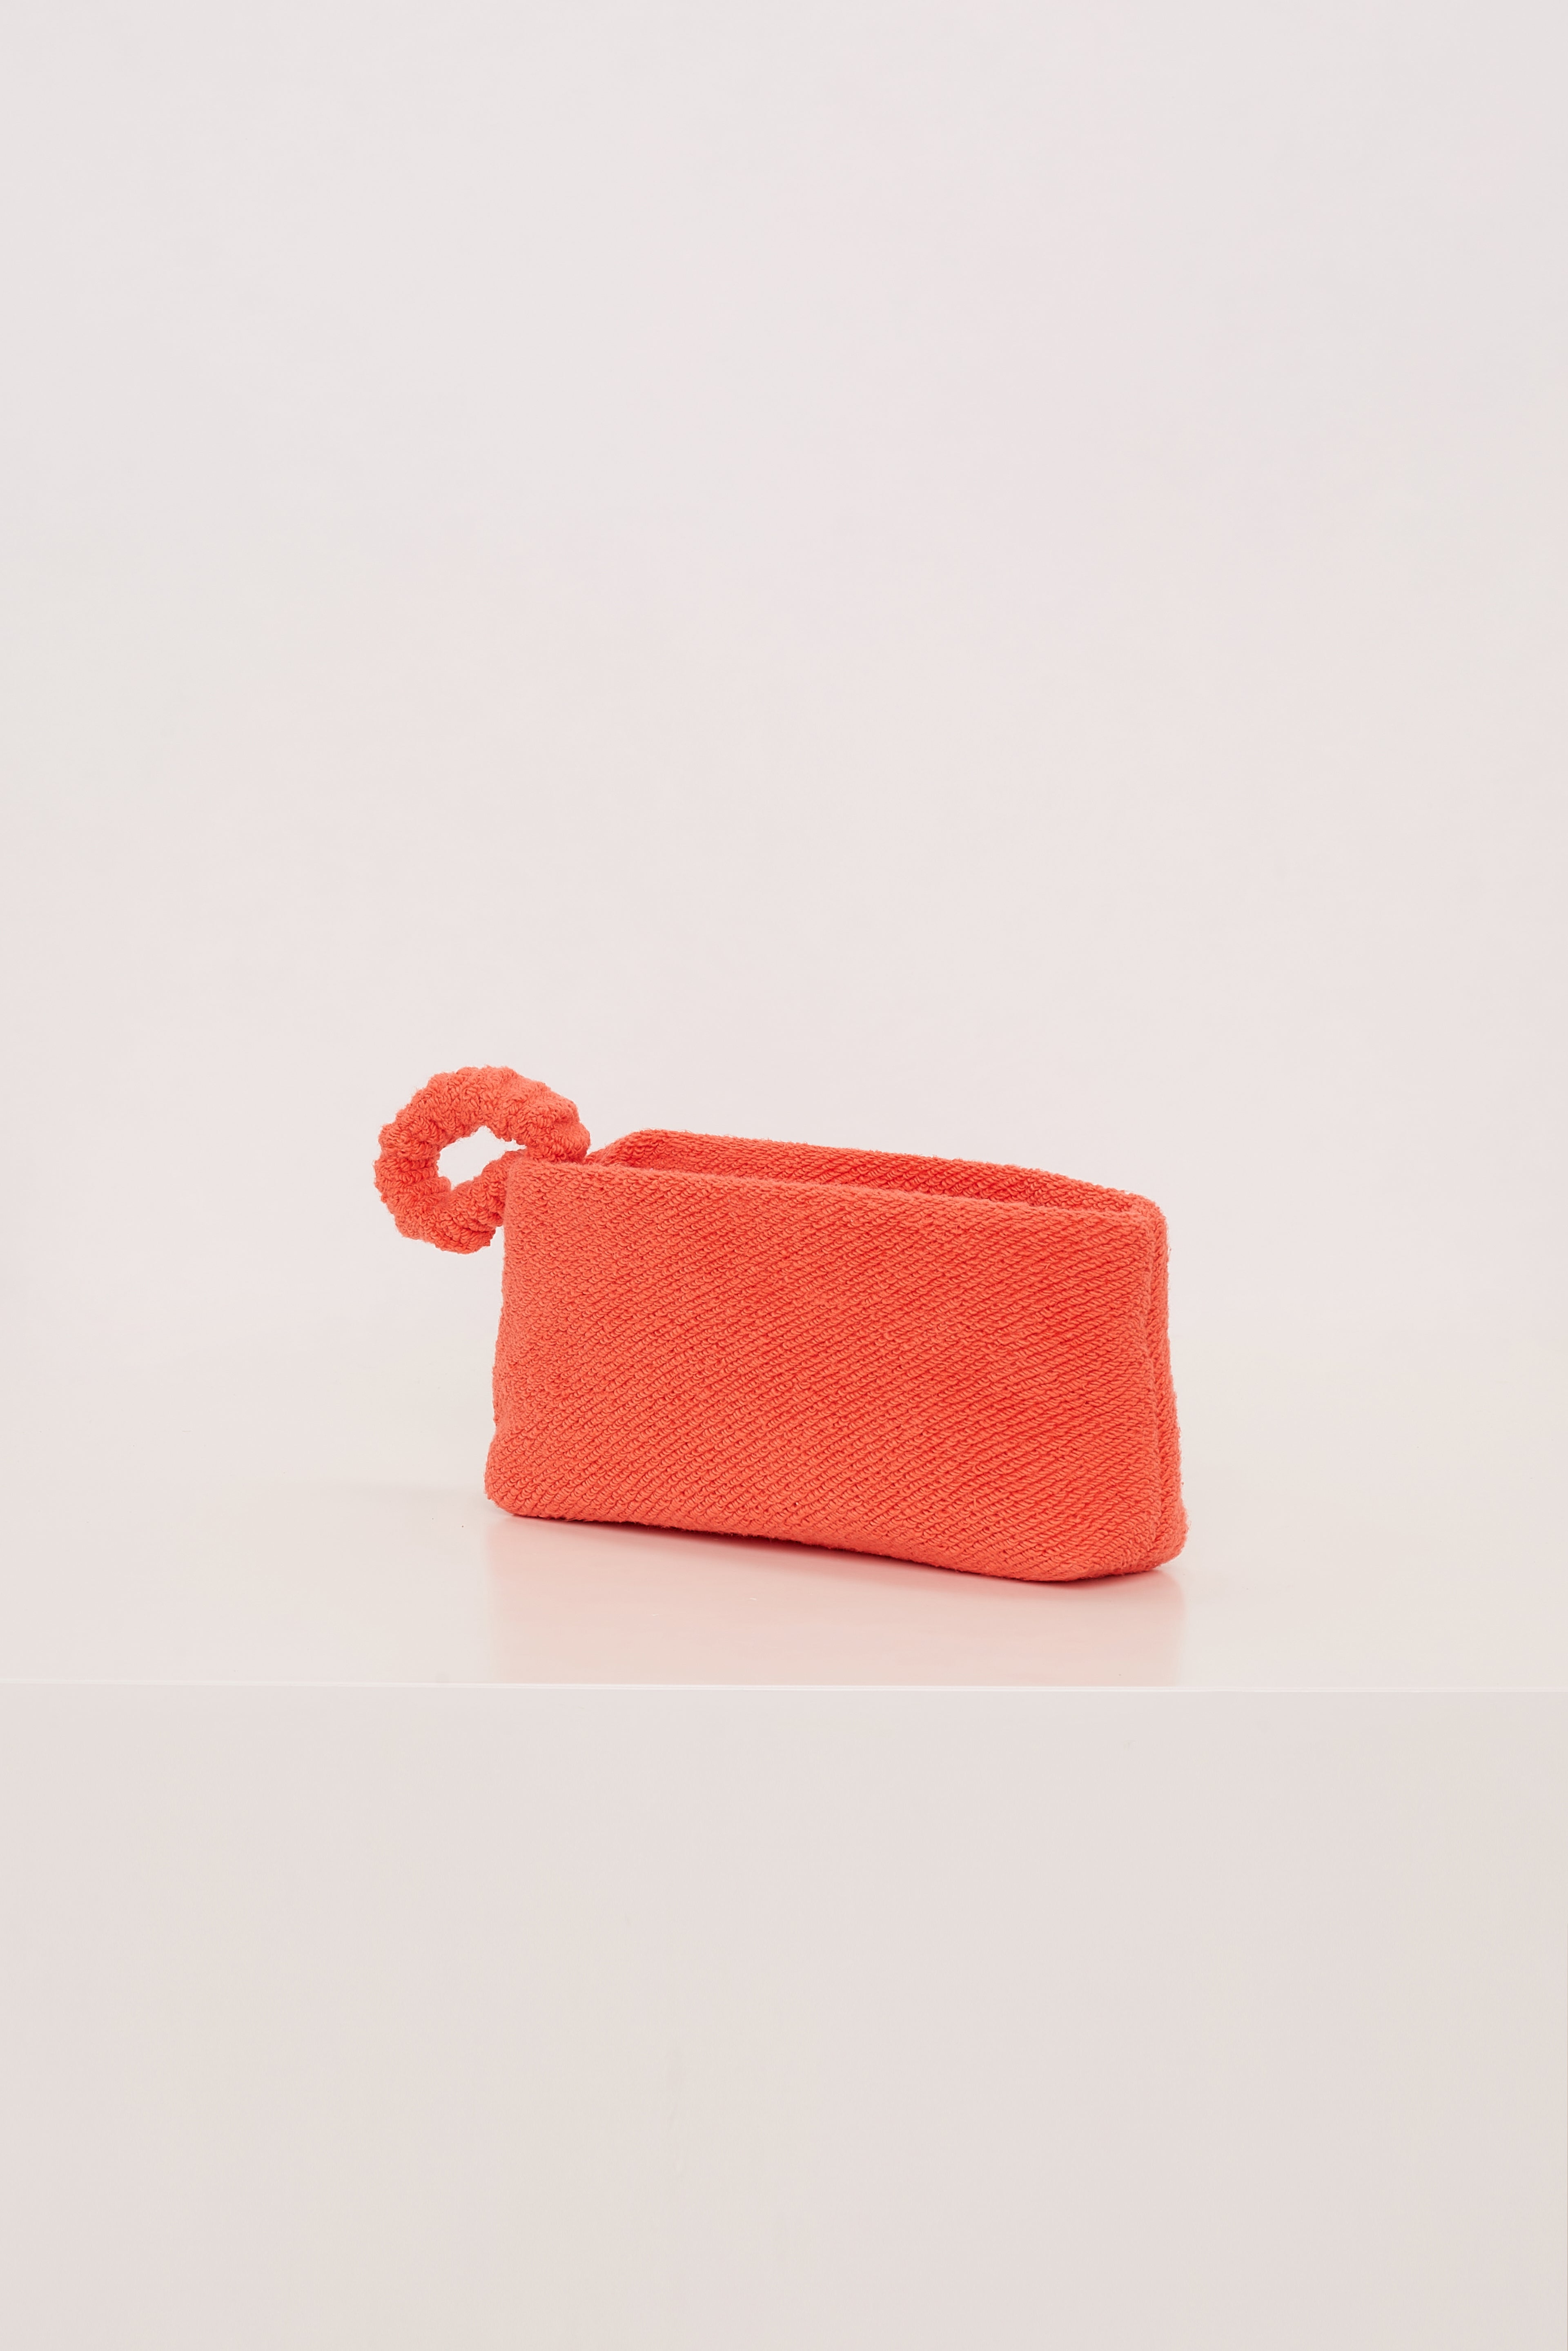 Dorothee-Schumacher-OUTLET-SALE-MODERN-TOWELLING-clutch-Accessoires-OS-spiced-orange-ARCHIVE-COLLECTION.jpg